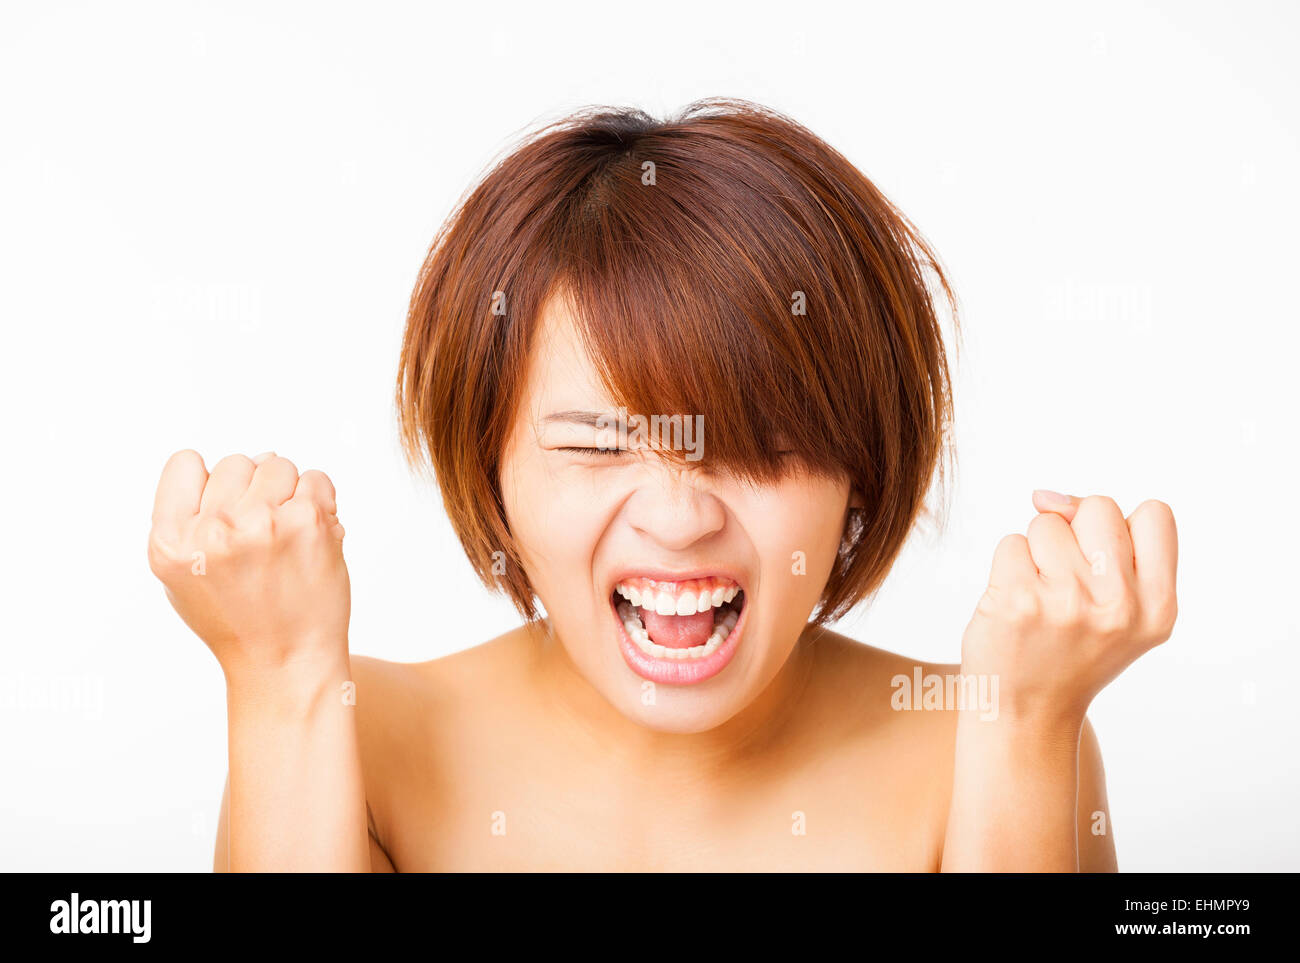 Closeup angry young woman and yelling screaming Stock Photo